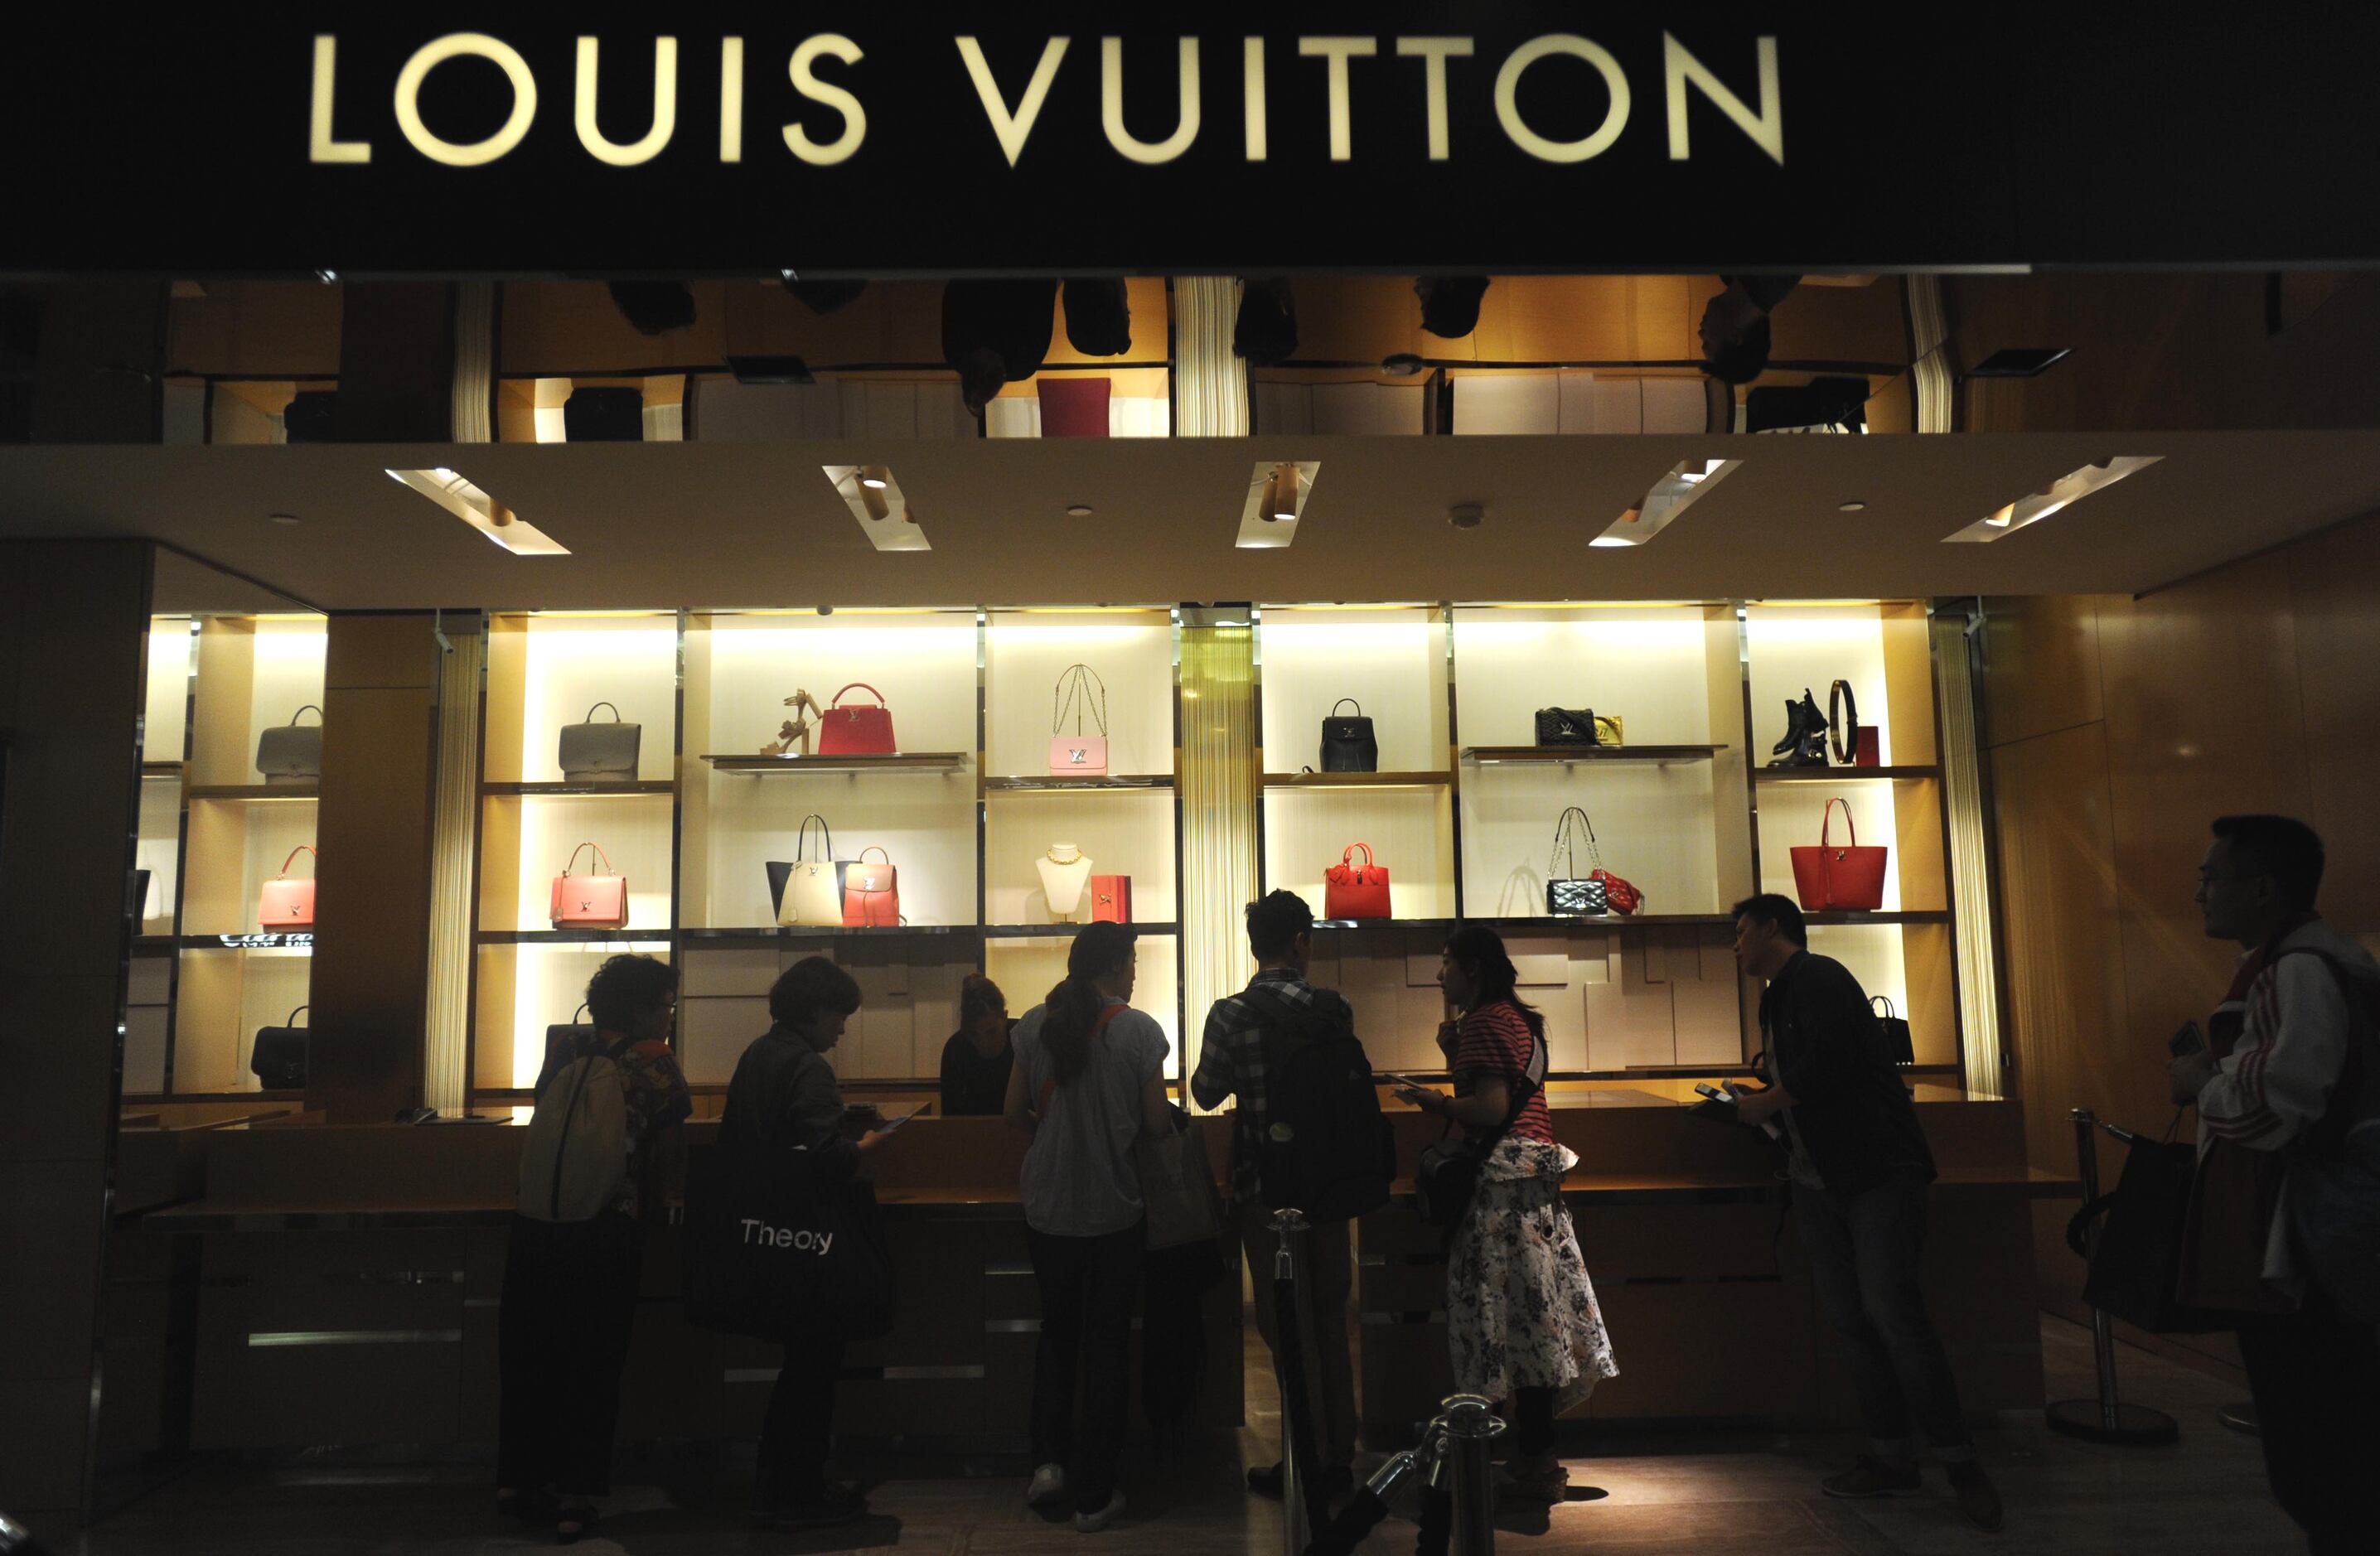 I was invited to visit @Louis Vuitton's newest lounge located